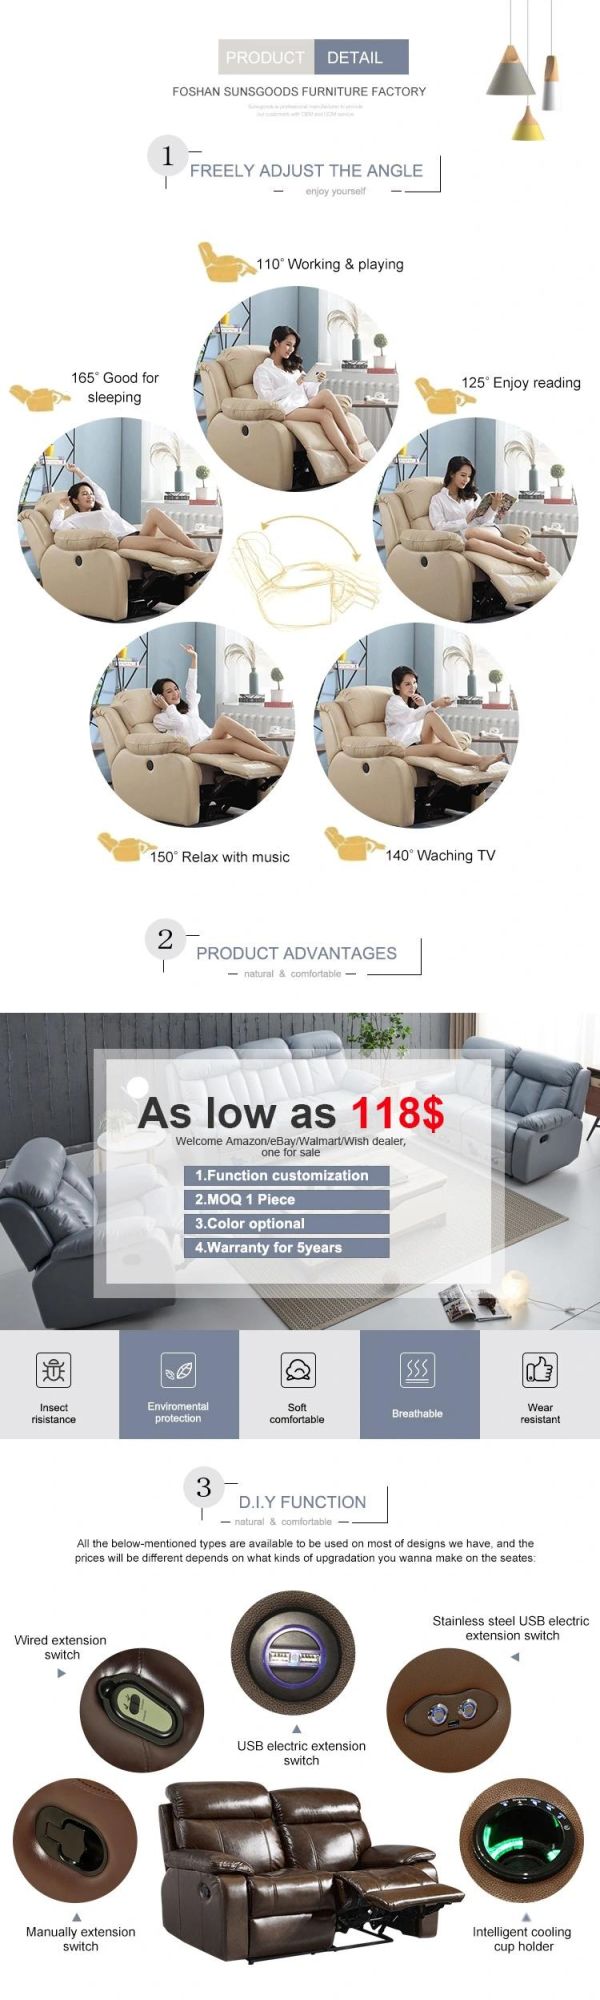 China Manufactory 3 Seater Recliner Sofa Chair Movies by Cinema Room